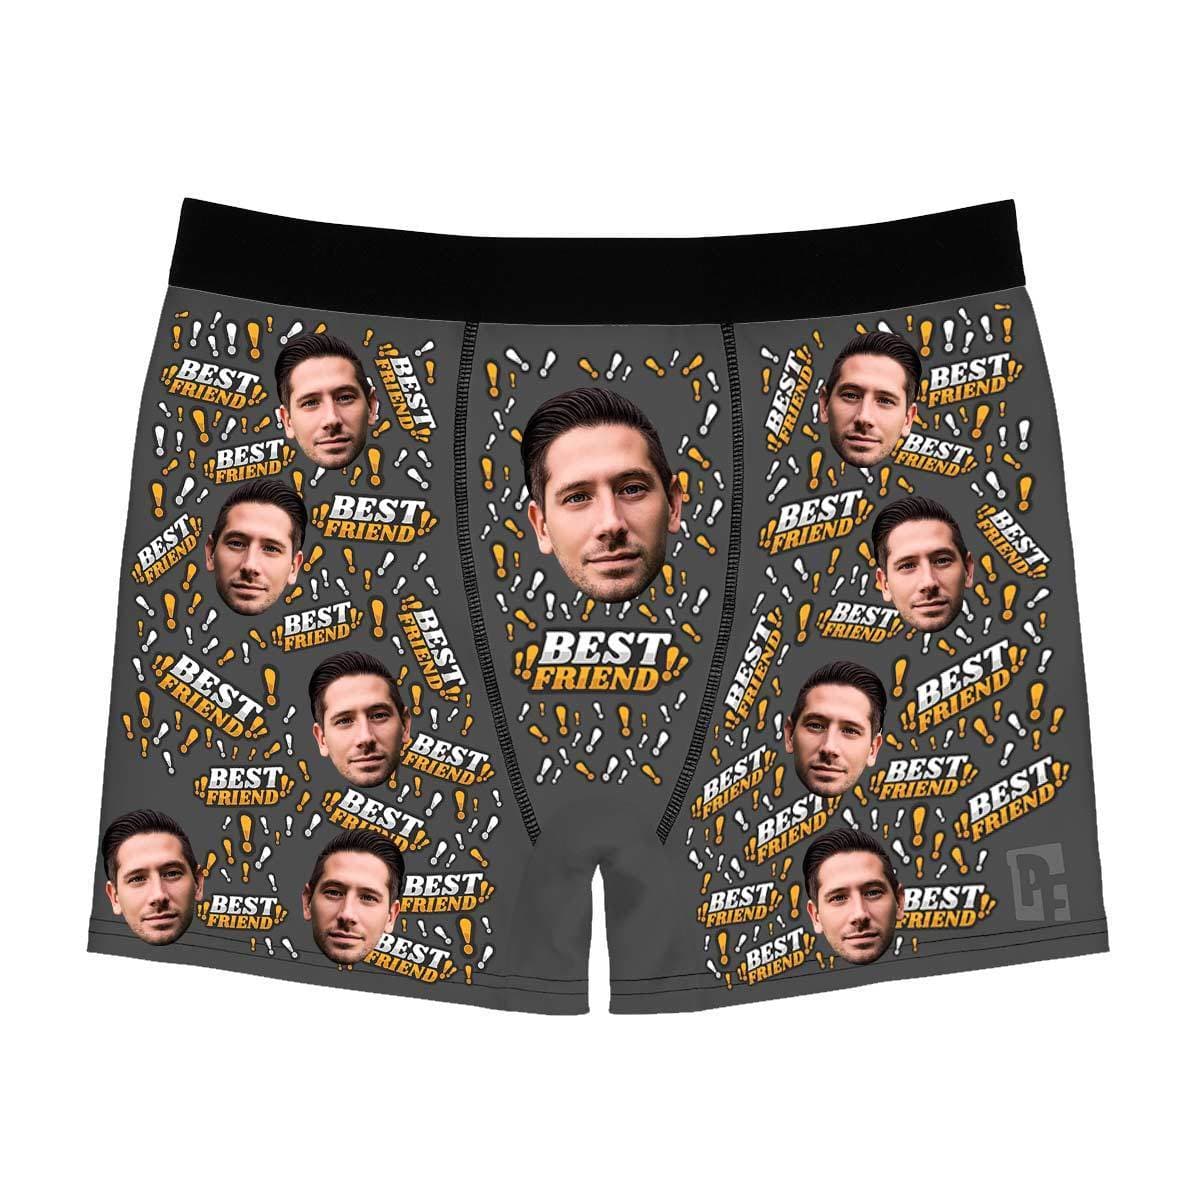 Dark Best Friend men's boxer briefs personalized with photo printed on them